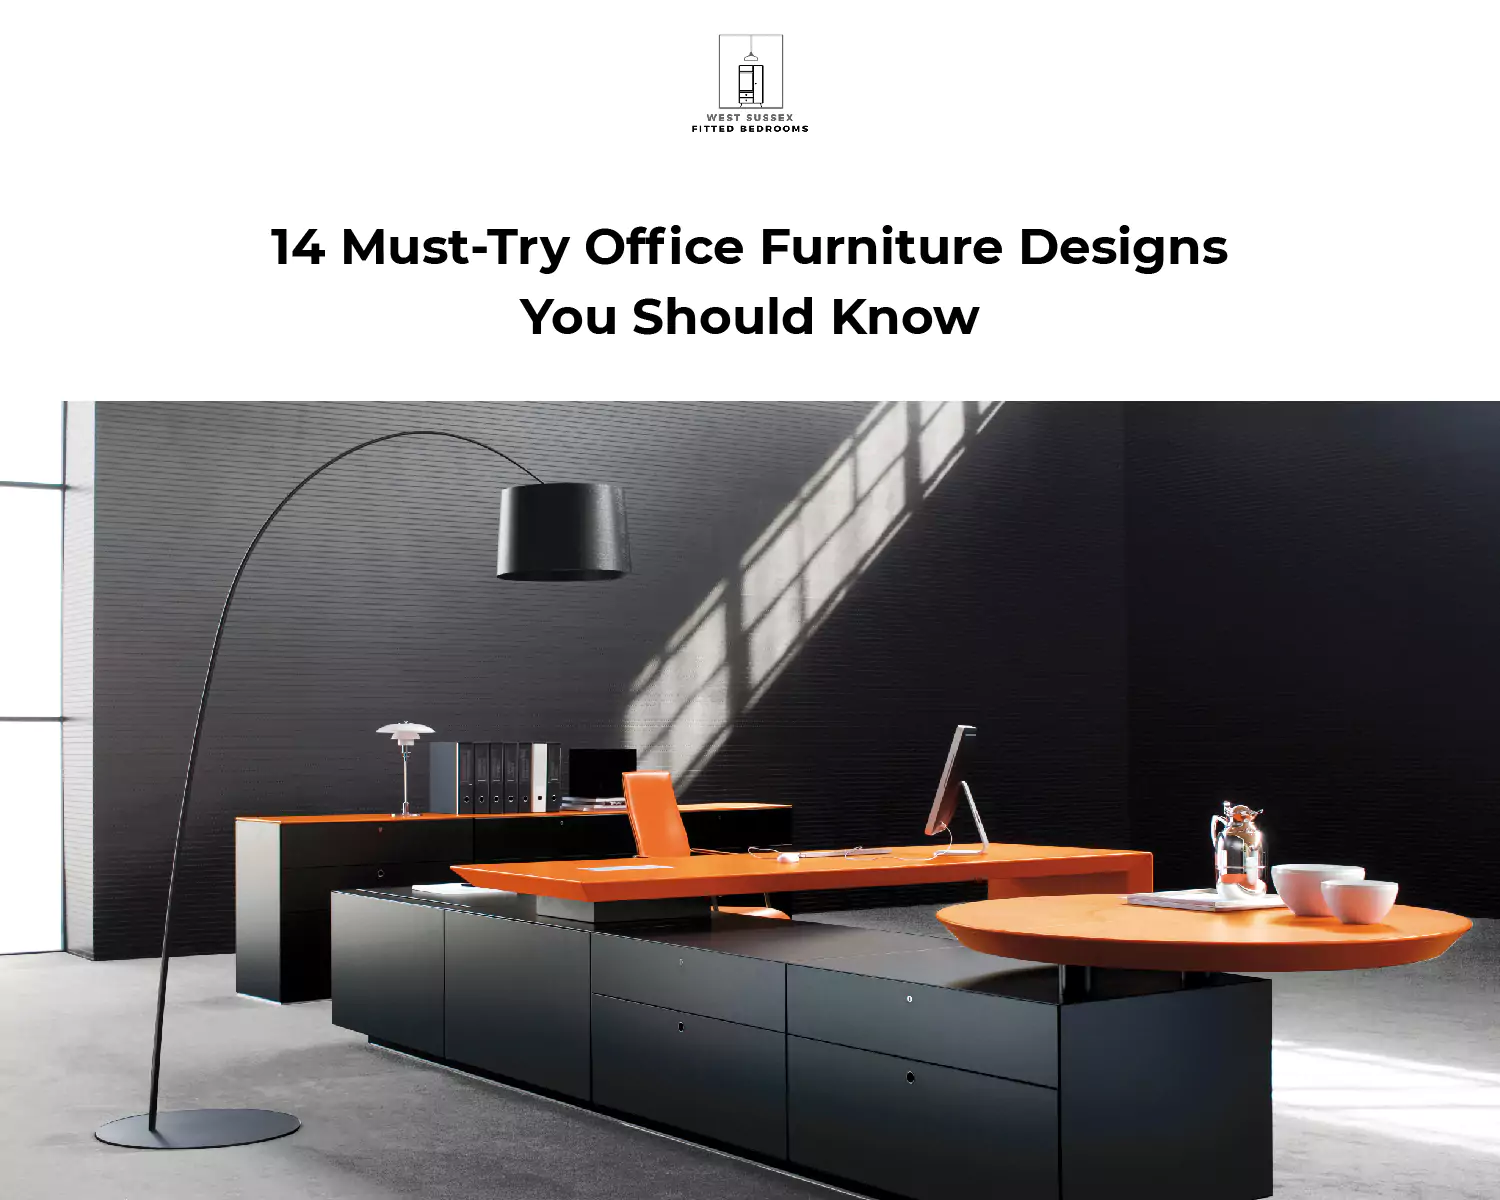 14 Must-Try Office Furniture Designs You Should Know